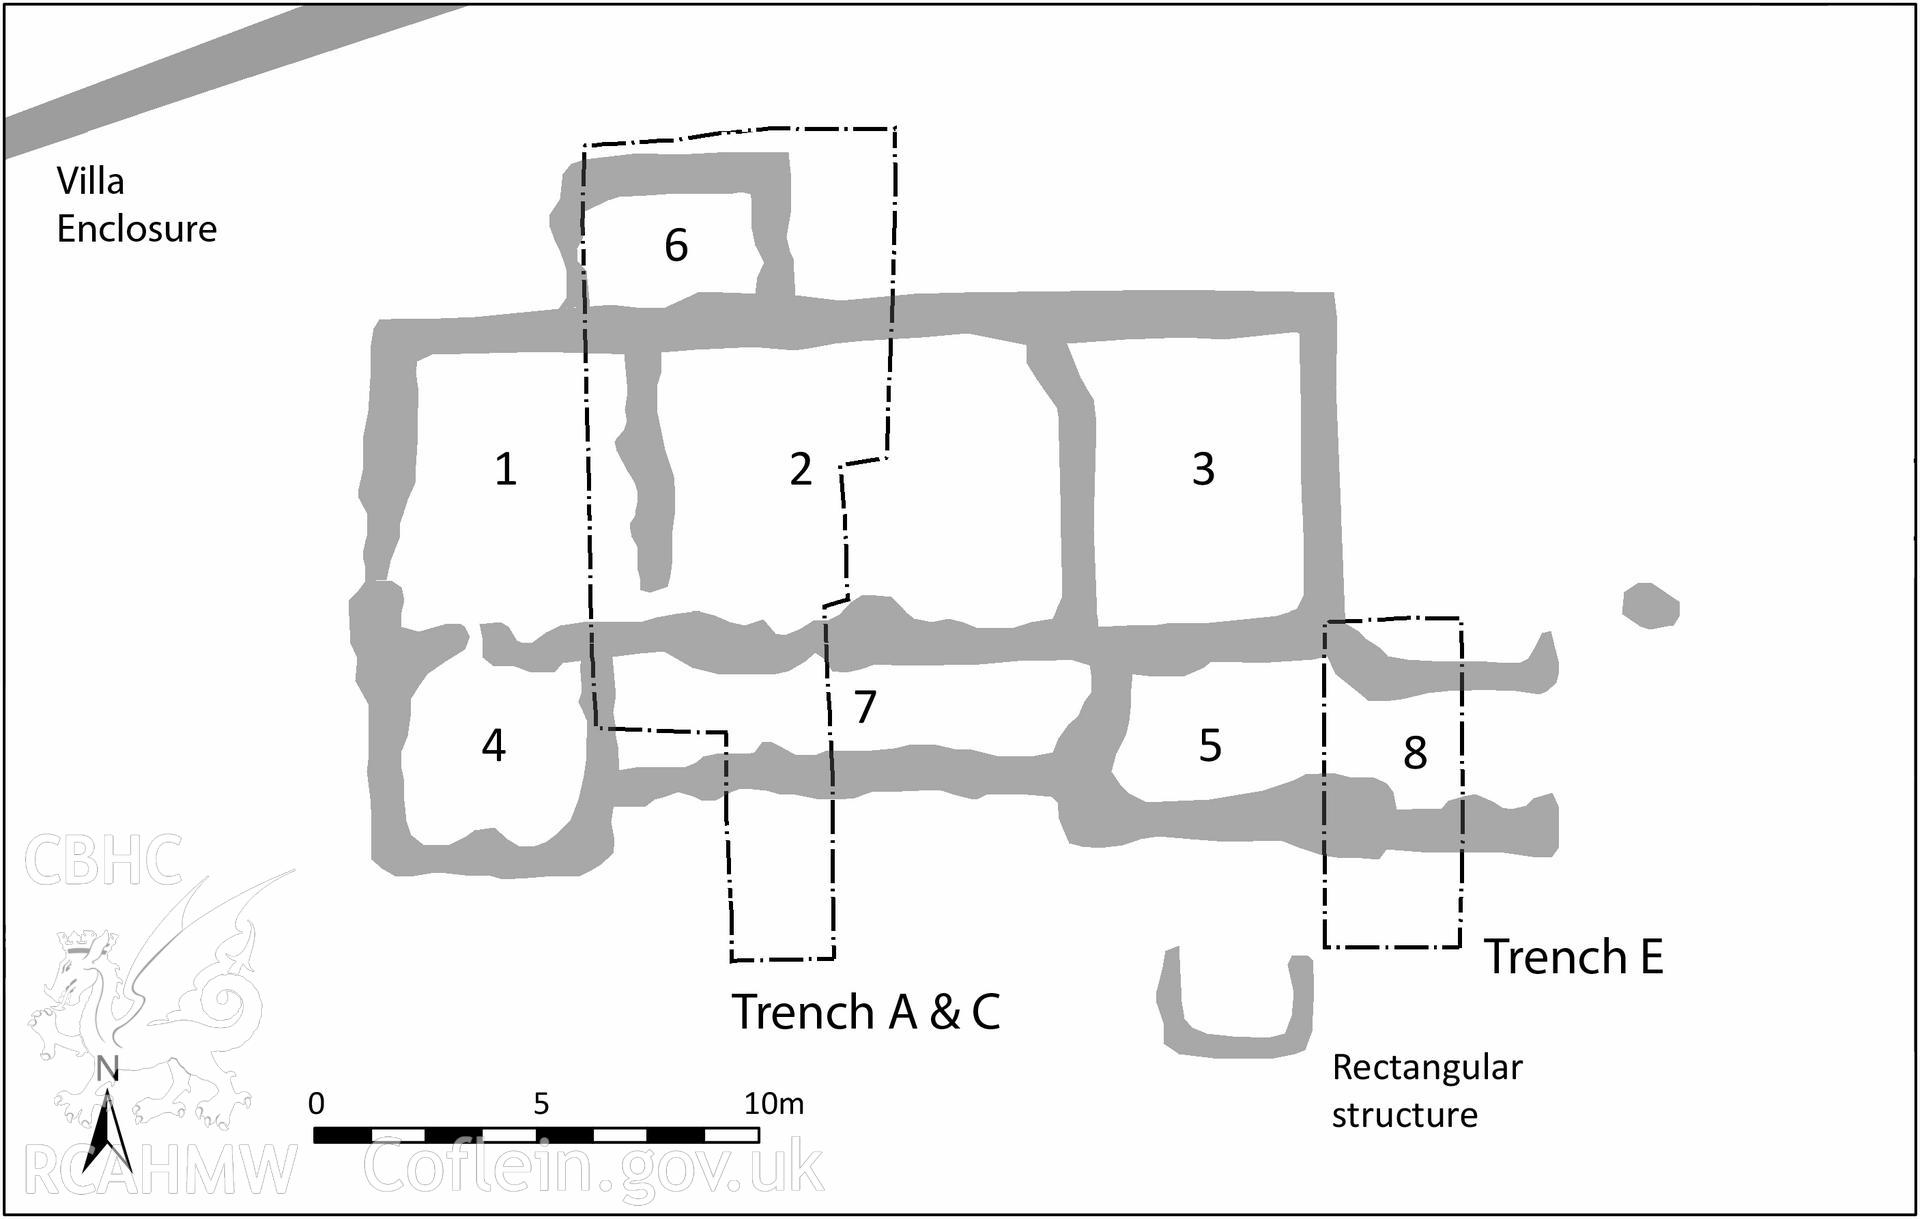 Arch Camb 167 (2018) 143-219. "The Romano-British villa at Abermagwr, Ceredigion: excavations 2010-2015" by Davies and Driver. Web-friendly .tif version of fig 5. Plan showing room numbers of the house.